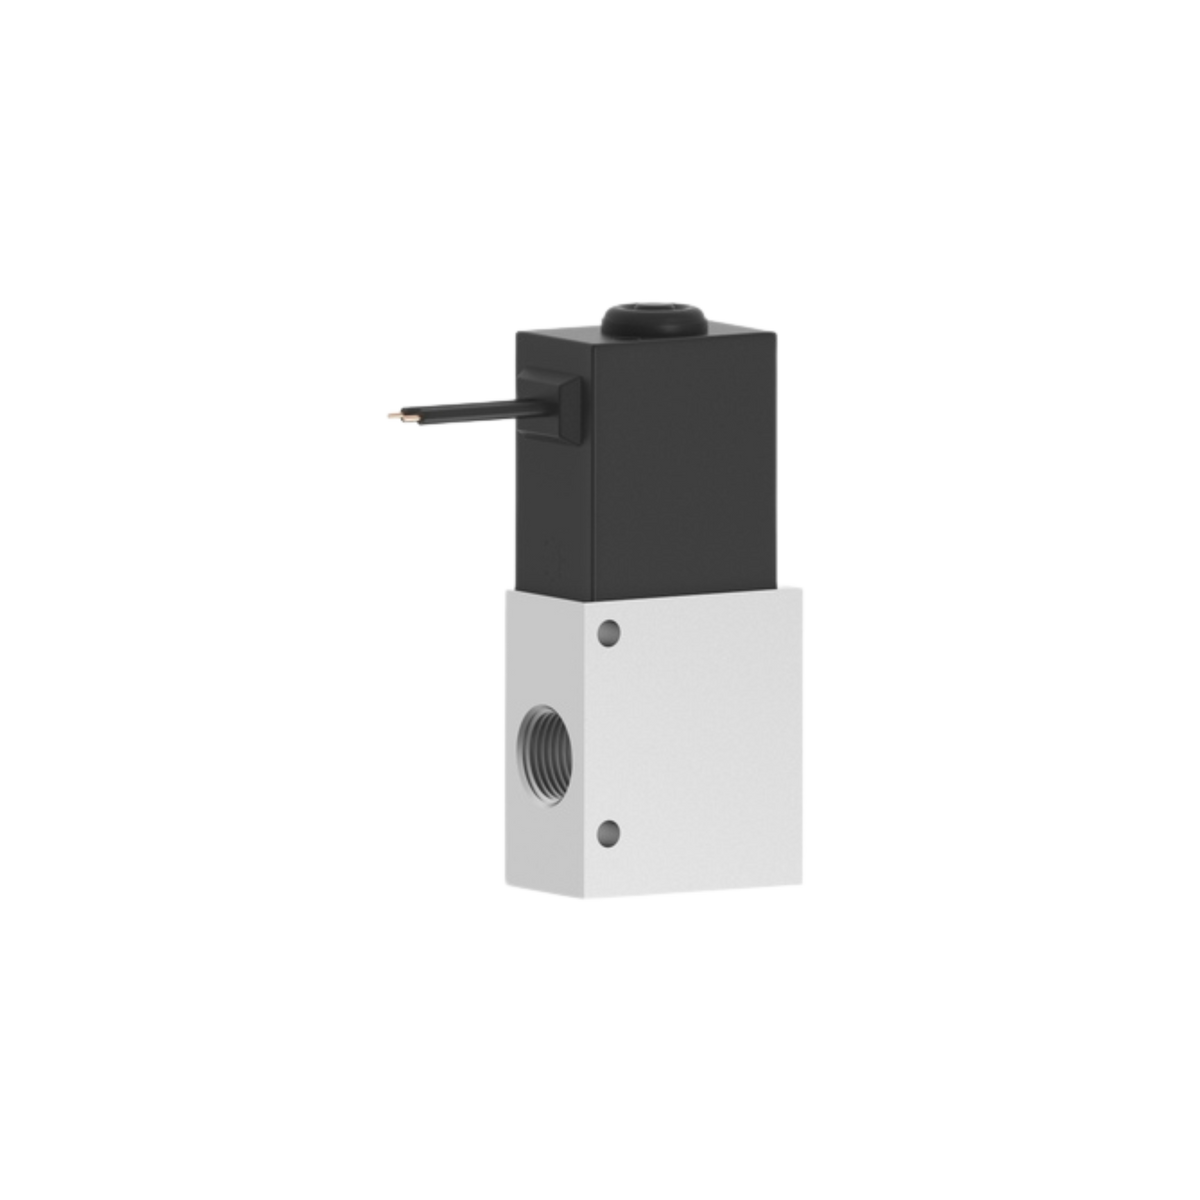 side view of an upright rectangular valve with a metal portion on the bottom, and a black material on the top, with a port on the left bottom side and electrical wires on the top left side